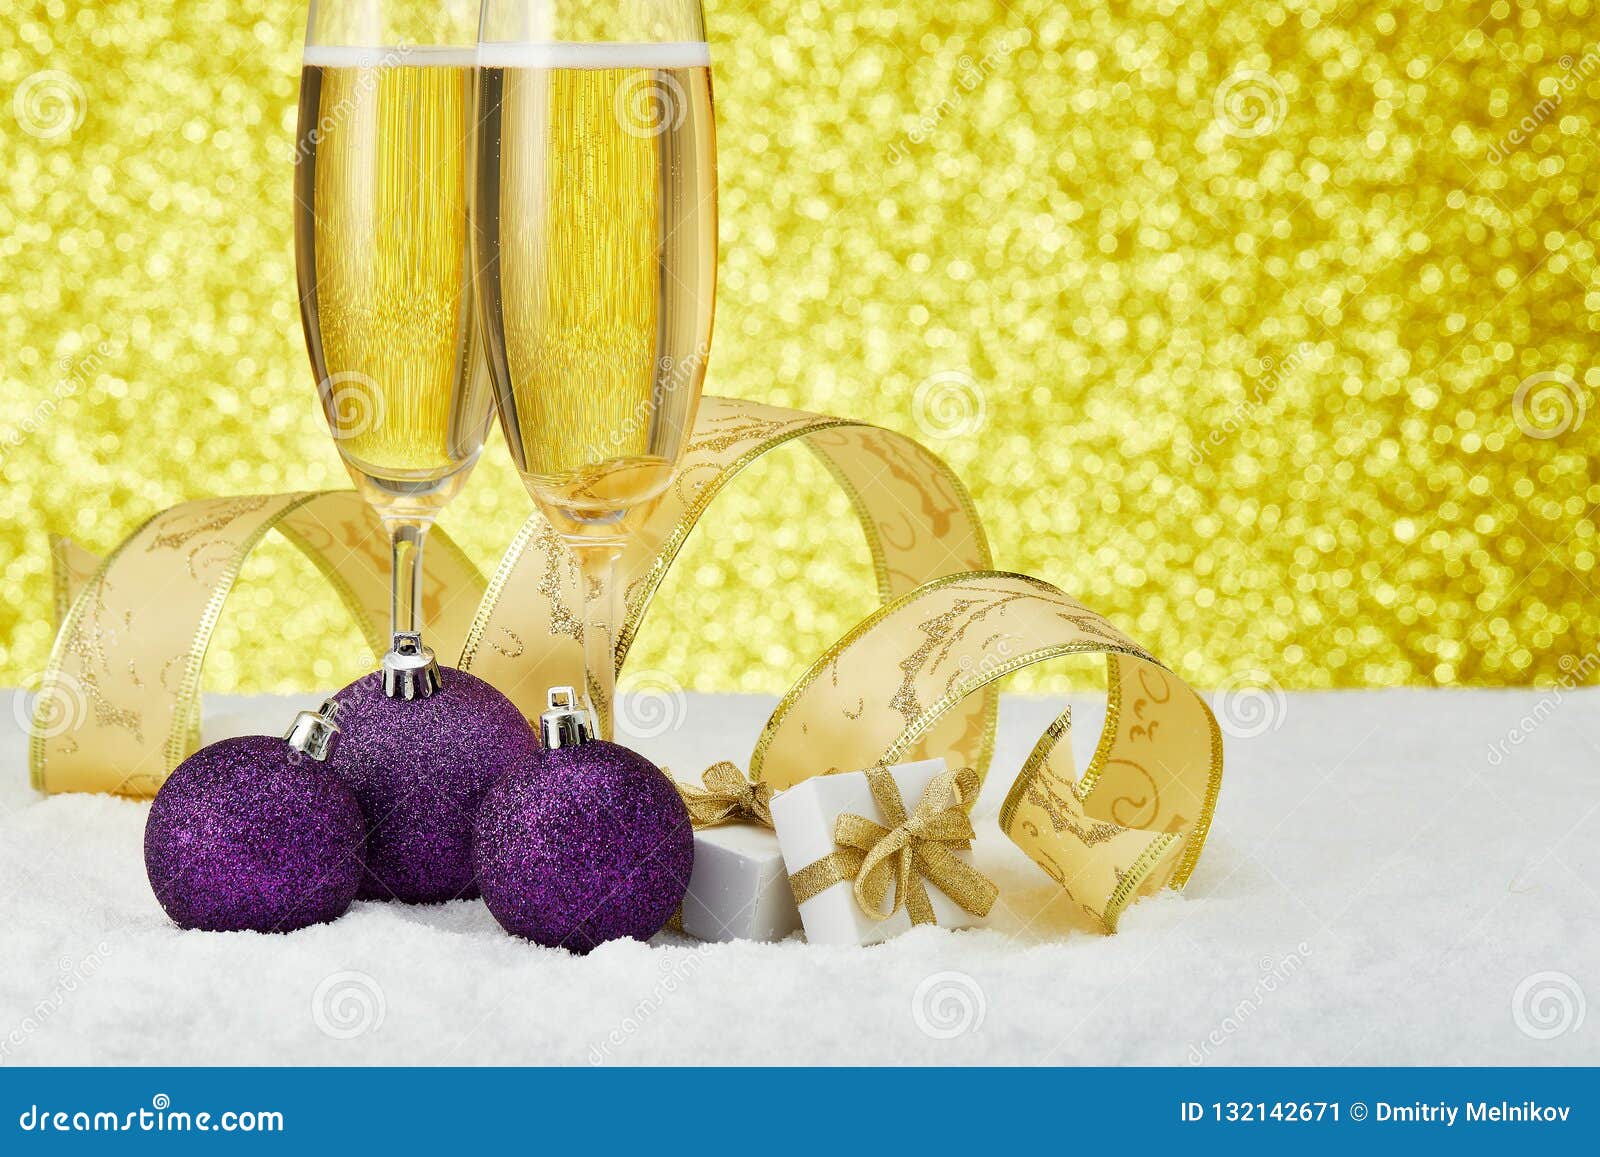 Champagne and Christmas Ornaments Stock Image - Image of holiday ...